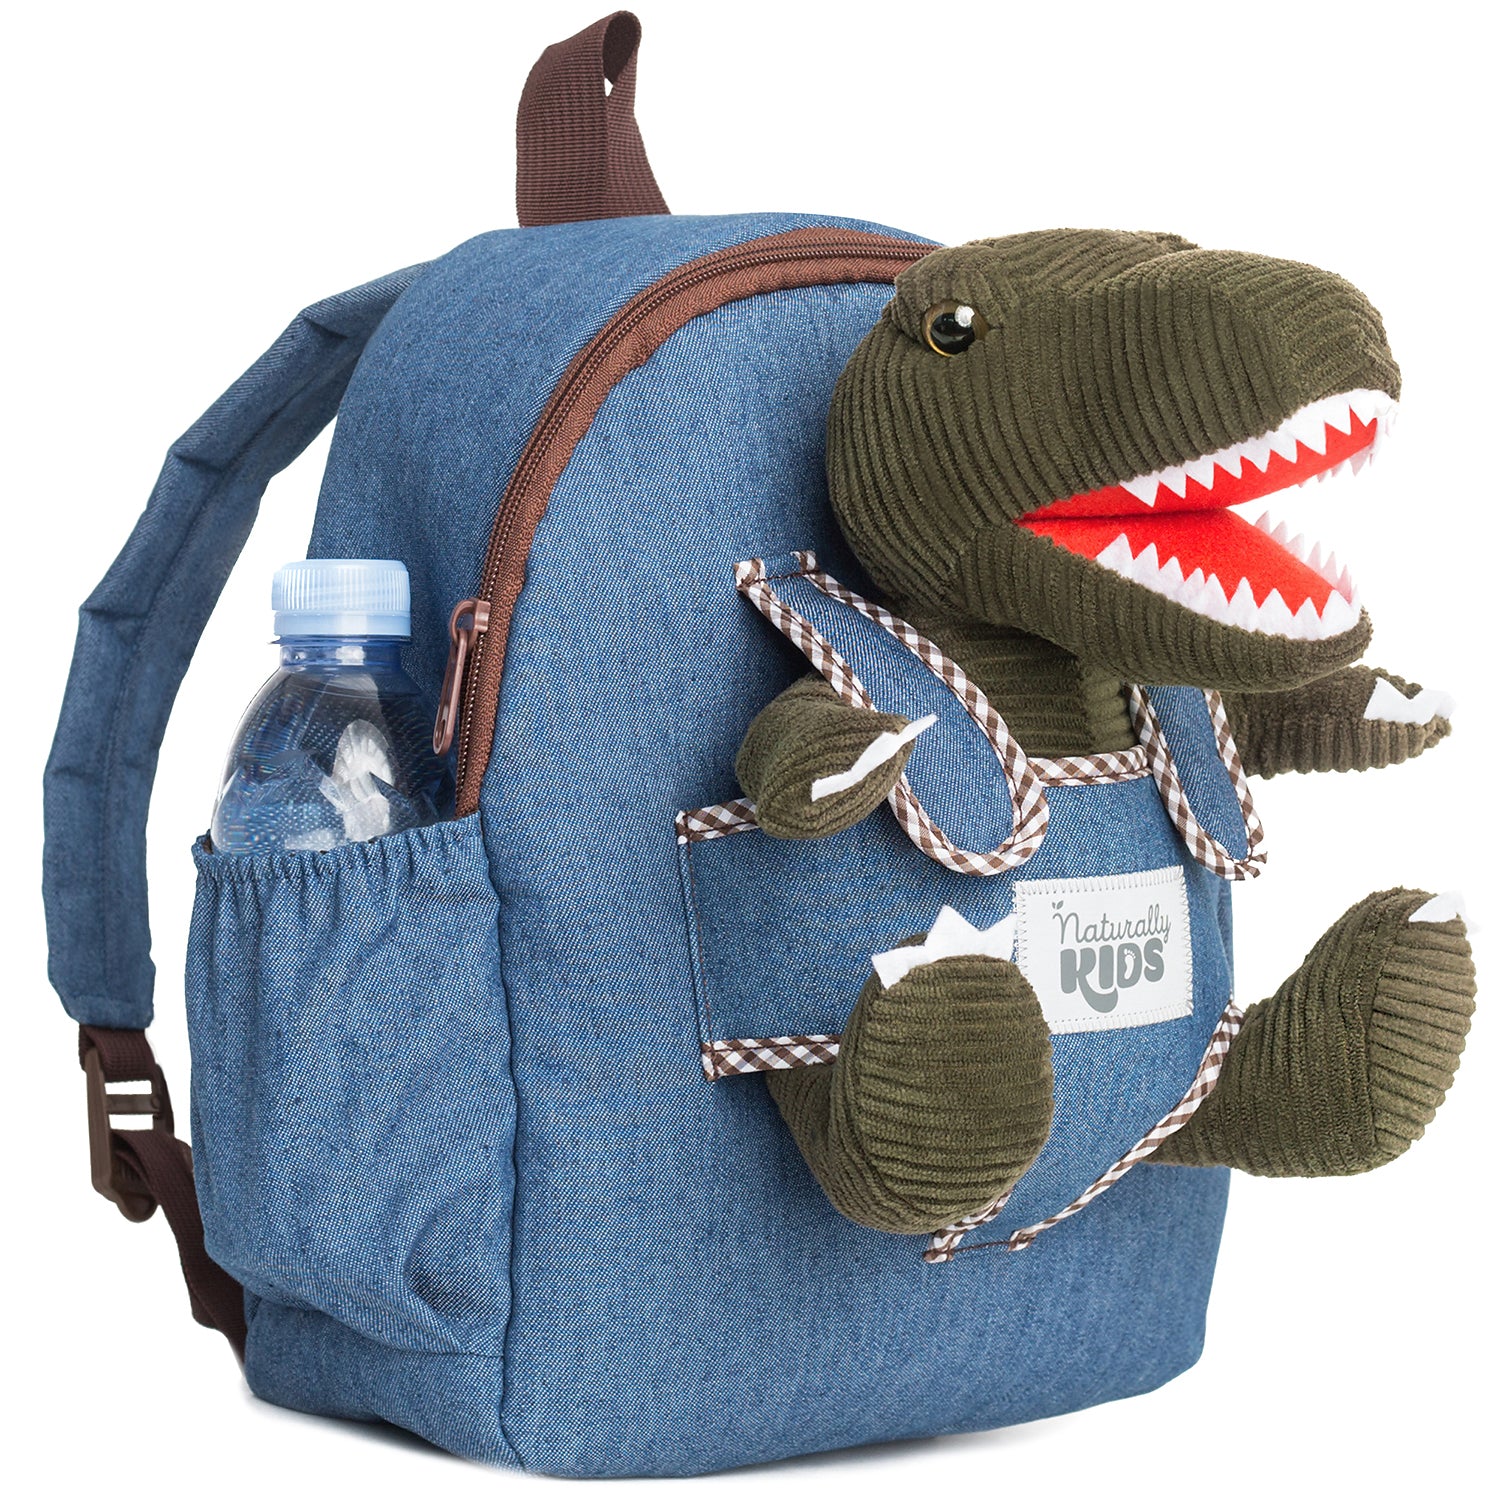 🎅🏽 Kids' Backpack with Plush Animal Toys — Christmas gifts for kids – 🦖  Naturally KIDS backpacks with plush dinosaur toys & unicorn gifts 🦄